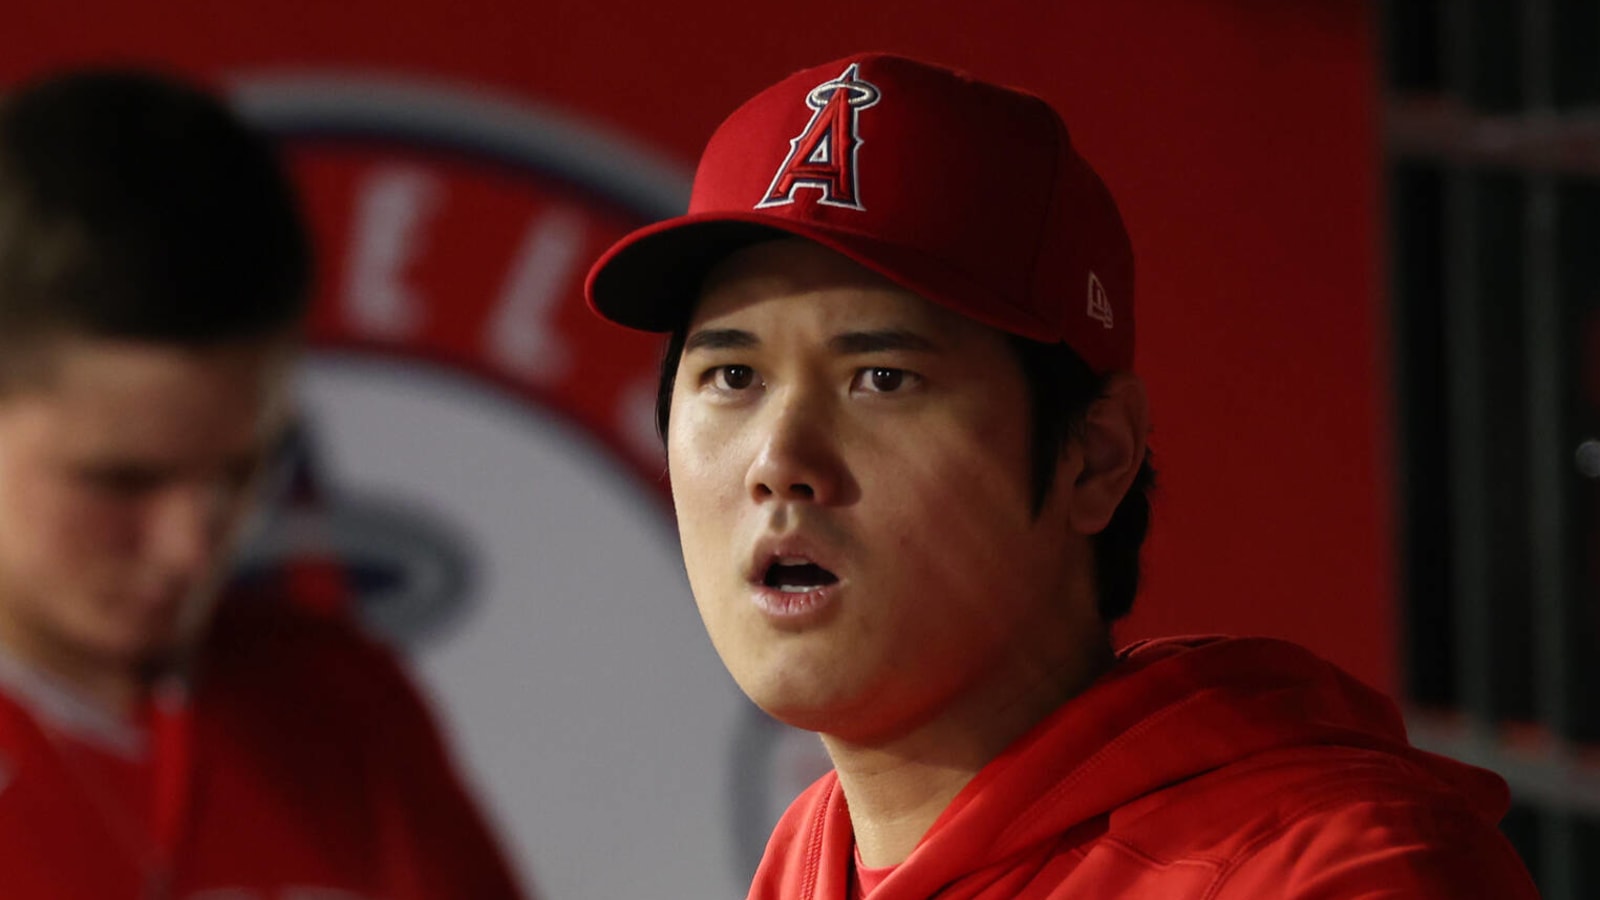 Bidding for Ohtani already over $500M?